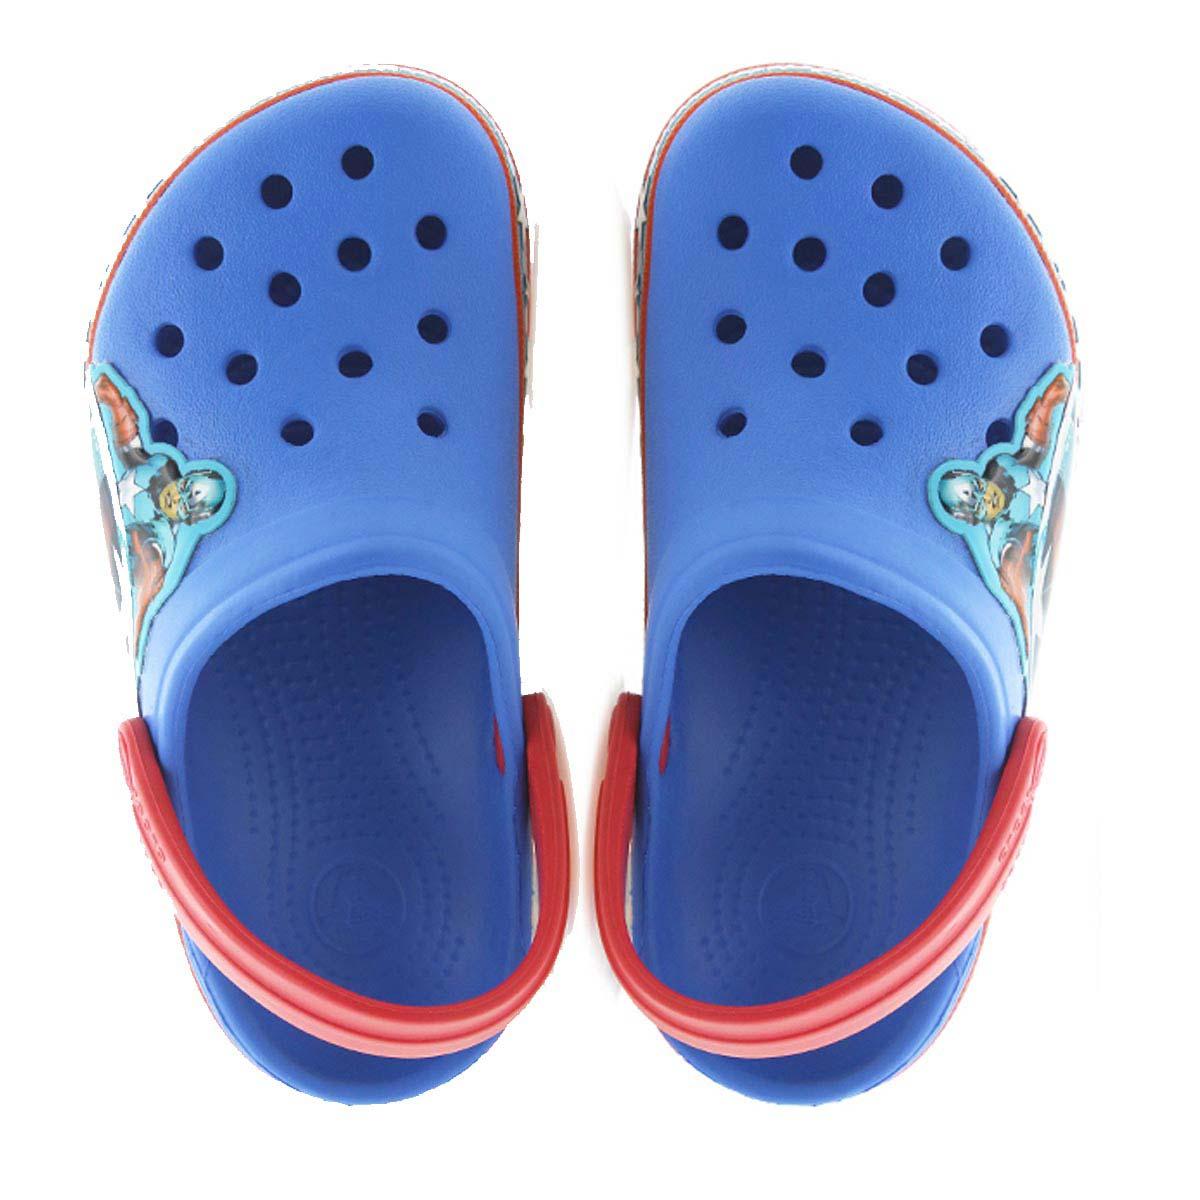 Crocs Crocband Captain America Kids Clog (Blue/Red) Online at Lowest Price  in India